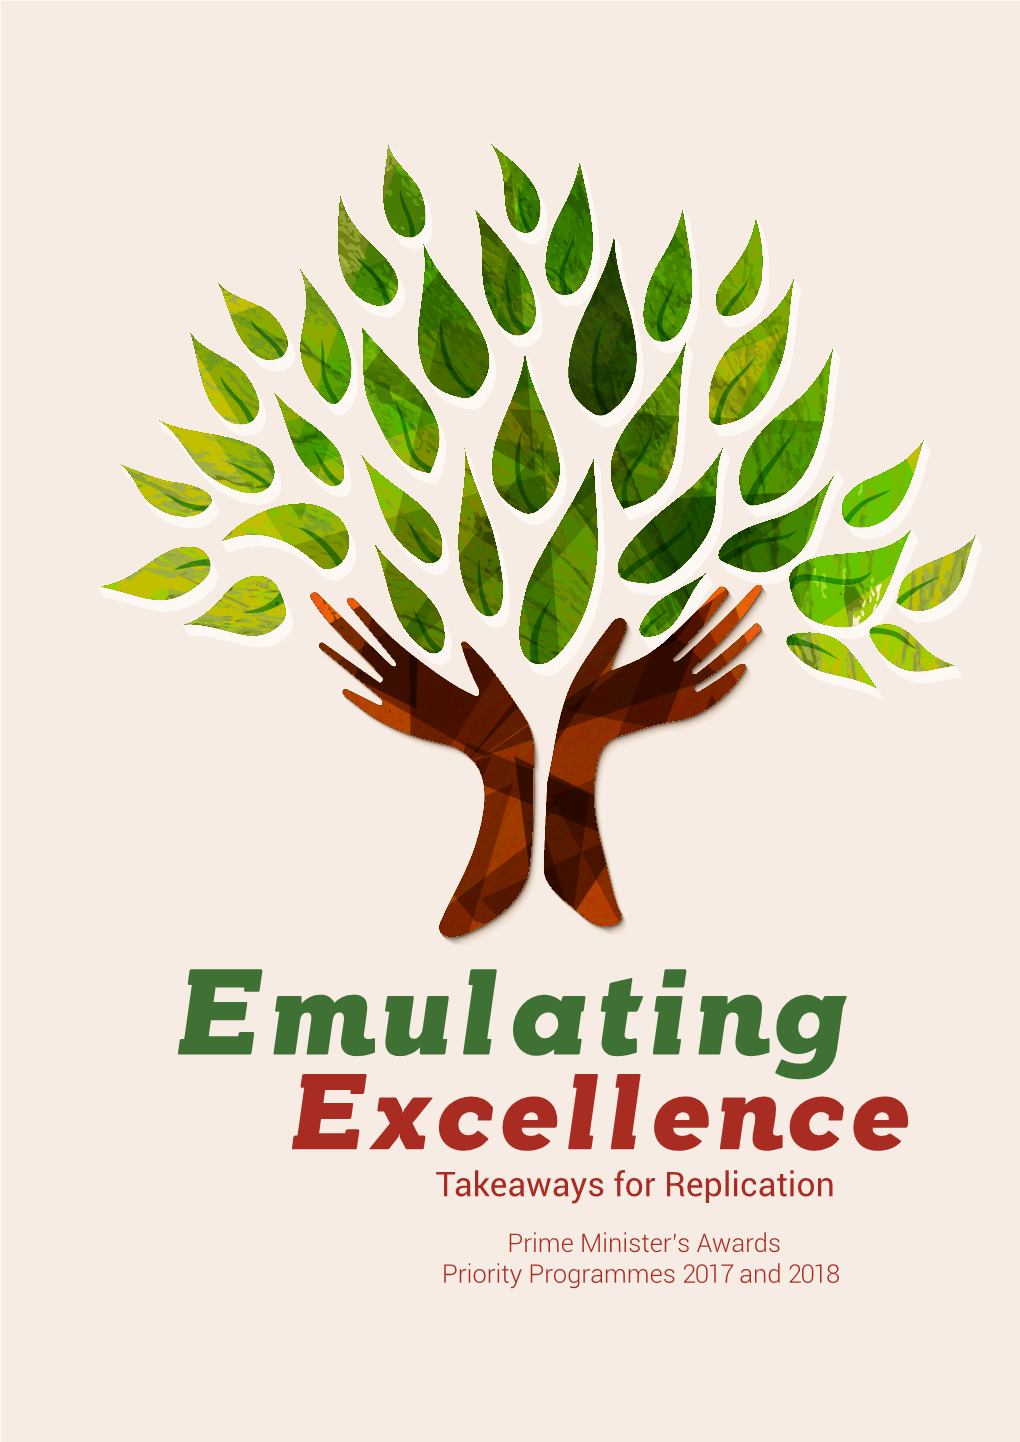 Emulating Excellence Takeaways for Replication